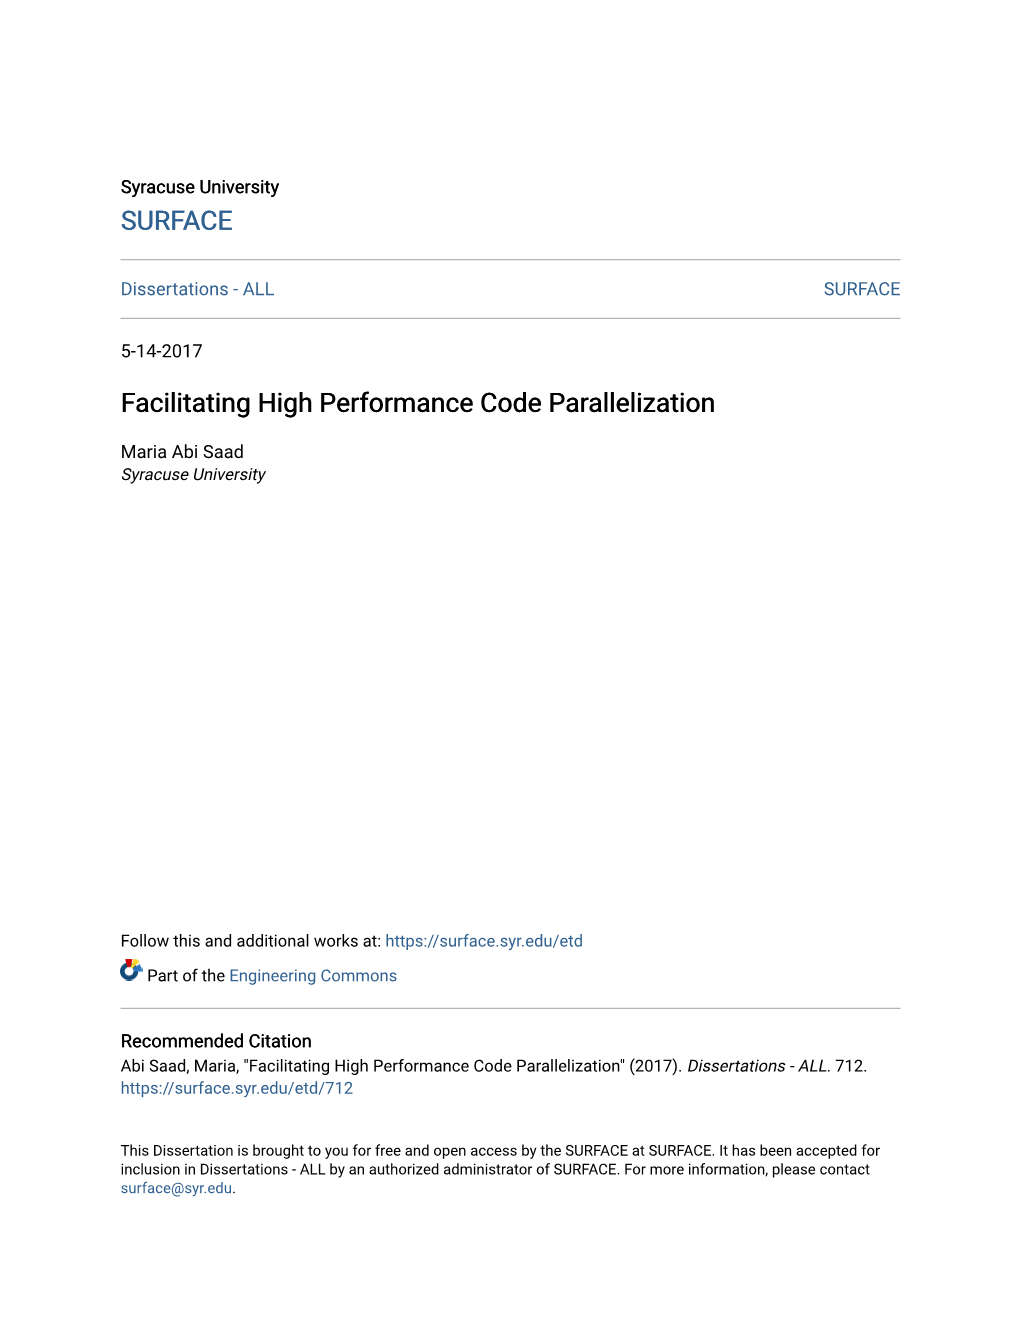 Facilitating High Performance Code Parallelization